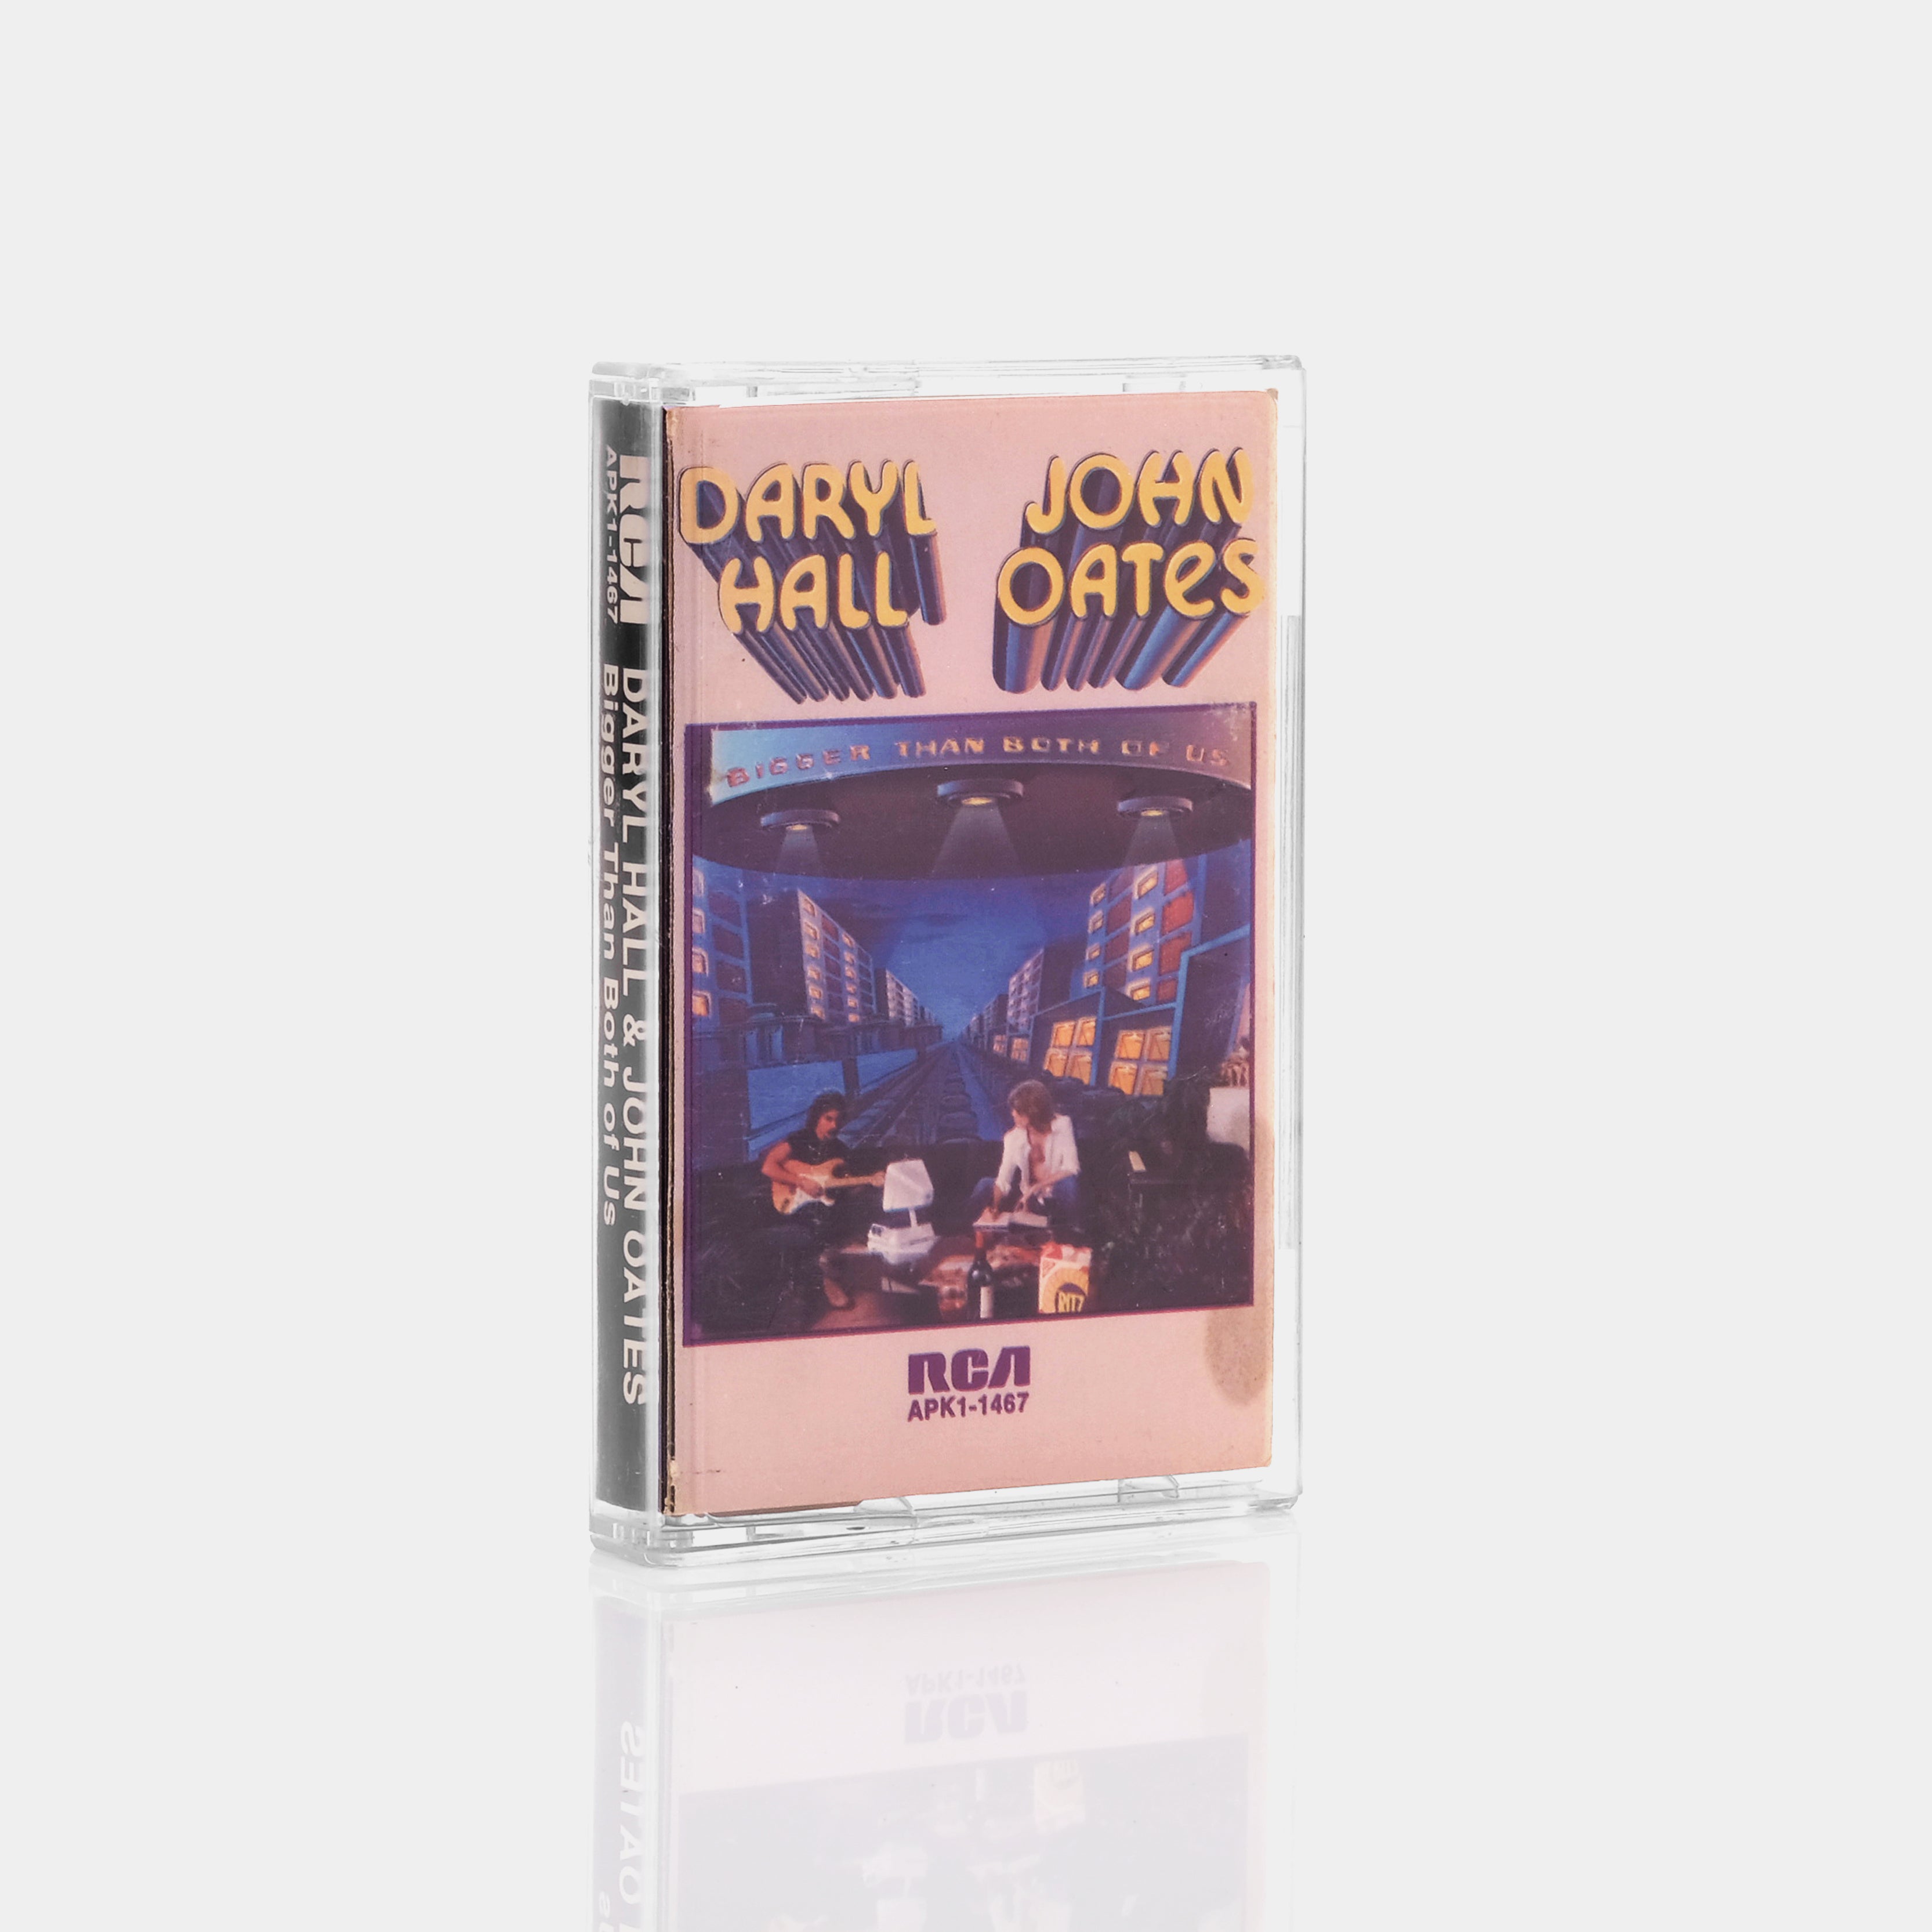 Daryl Hall And John Oates - Bigger Than Both Of Us Cassette Tape